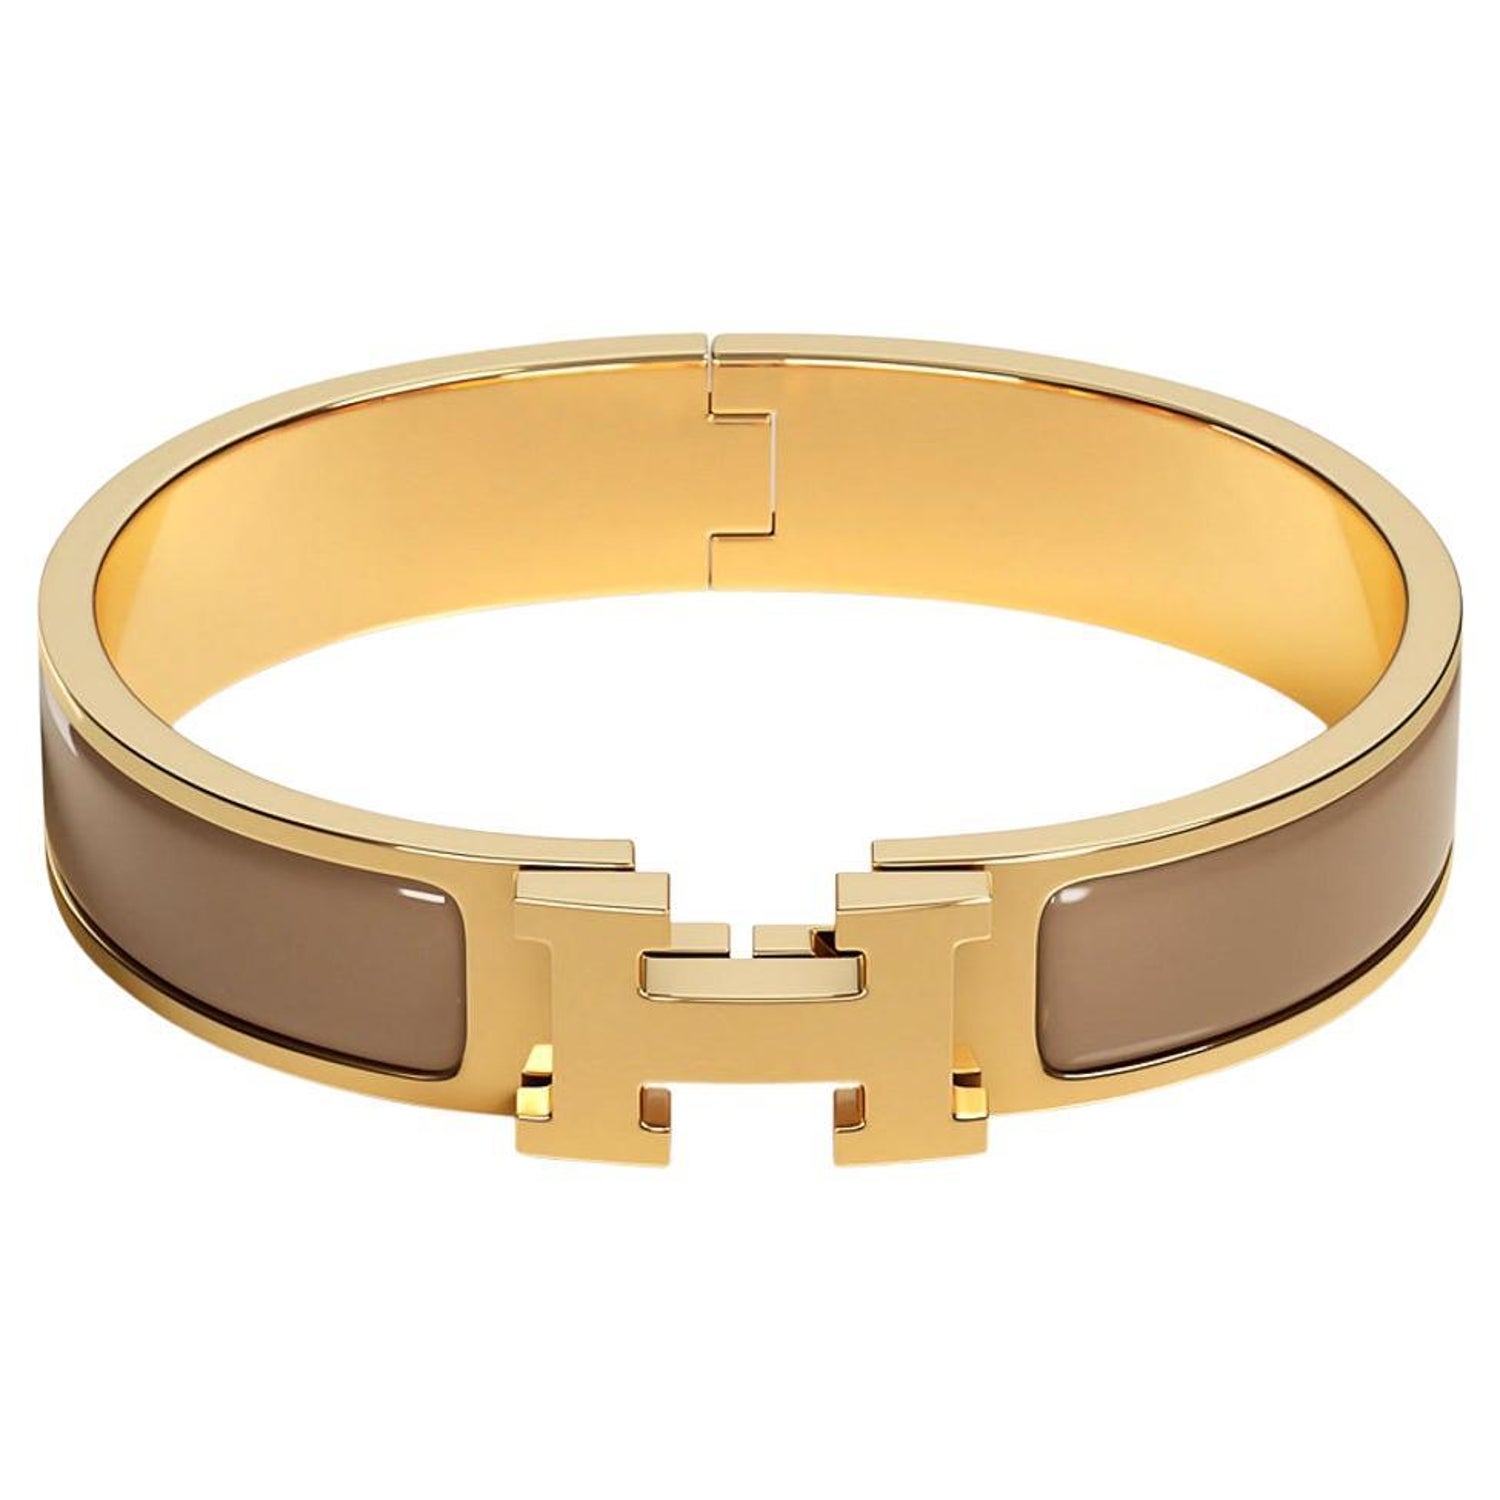 HERMES CLIC-CLAC H BRACELET, ROSEE DRAGEE - GOLD PLATED - SIZE SMALL (PM) -  Hebster Boutique